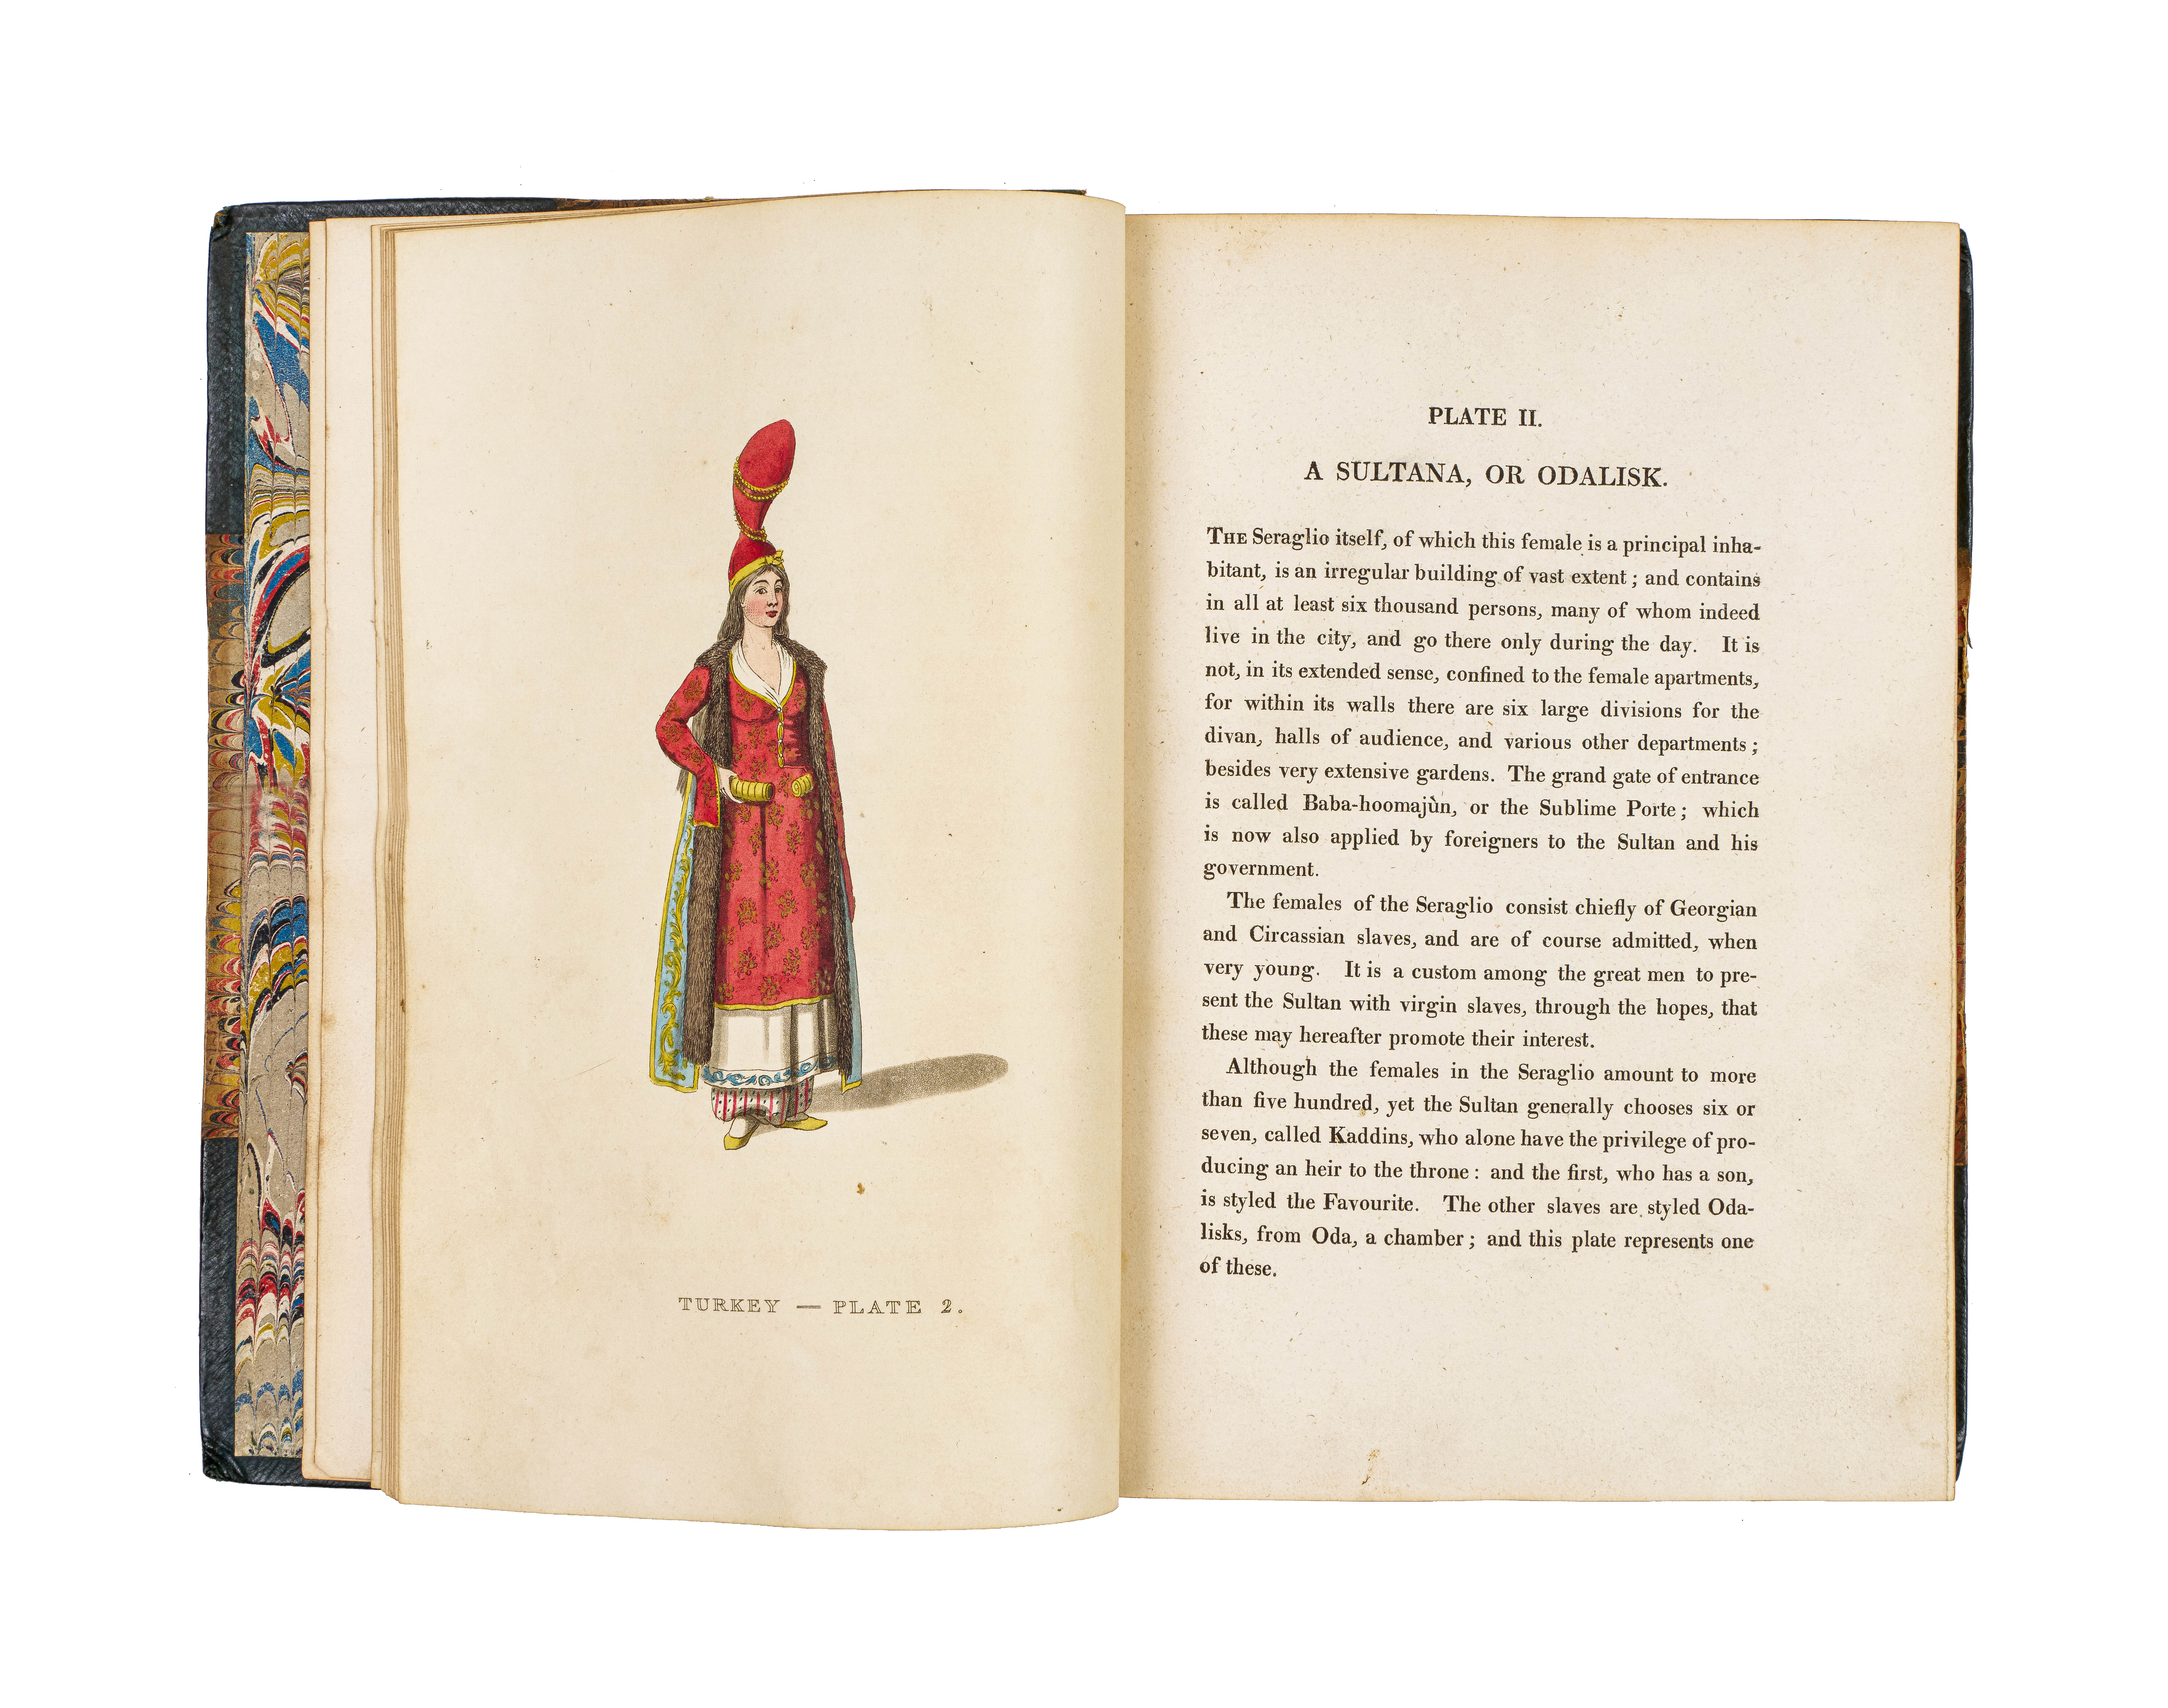 COSTUMES TURKEY, PICTURESQUE REPRESENTATIONS OF THE DRESS AND MANNERS OF THE TURKS, JOHN MURRAY, LON - Image 2 of 8